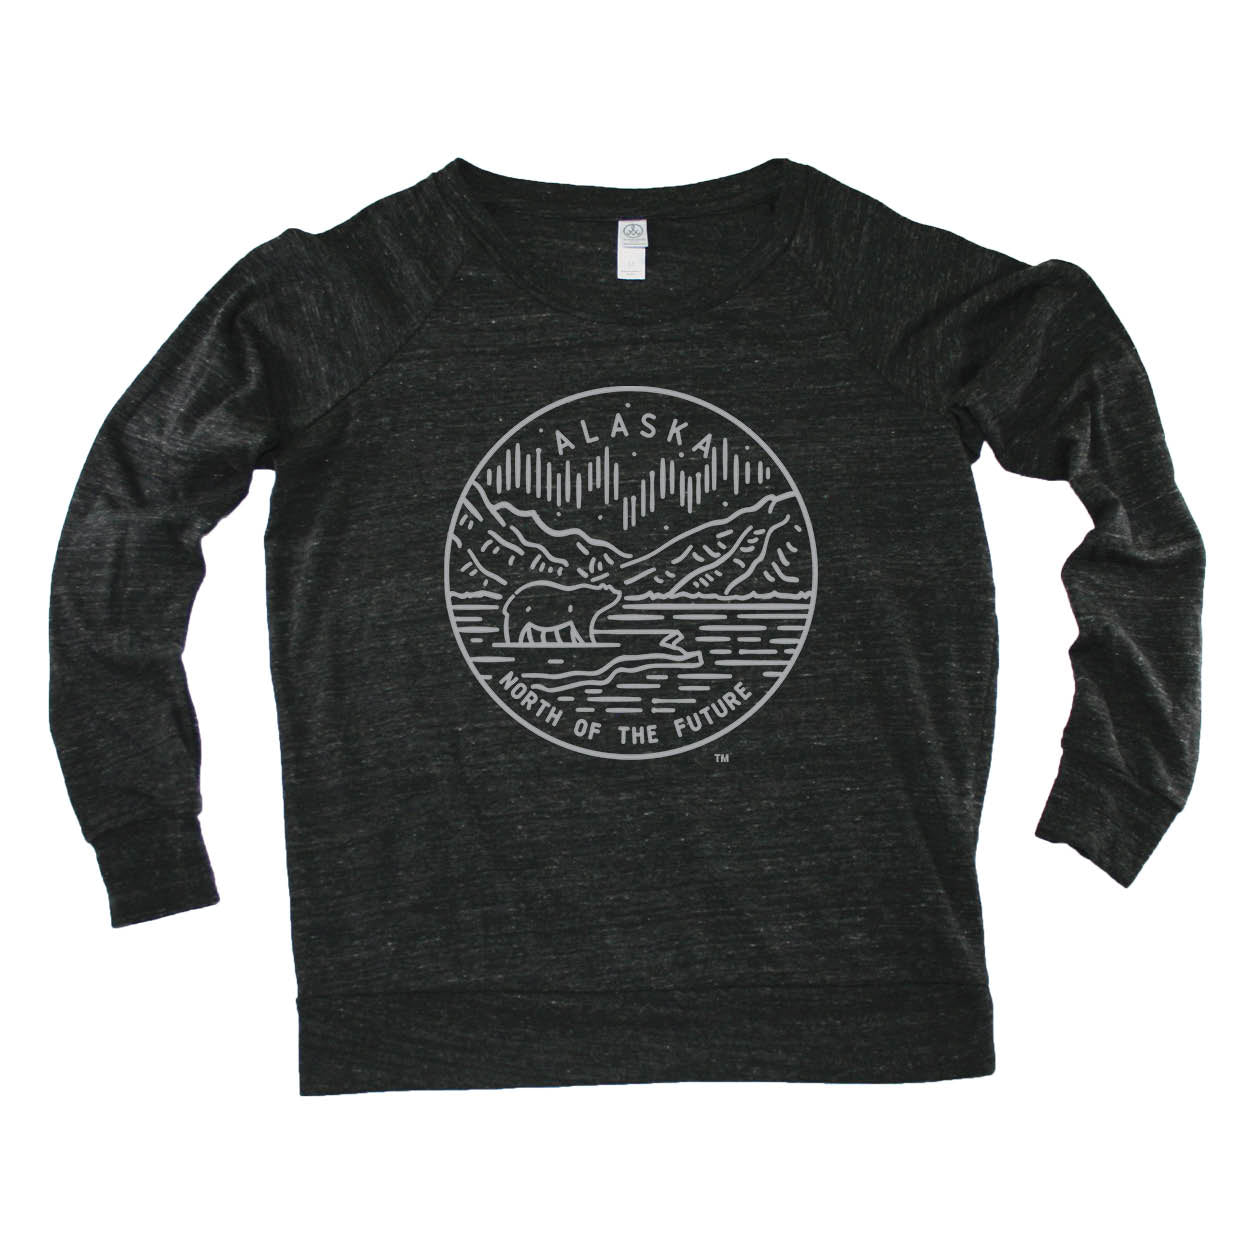 ALASKA LADIES' SLOUCHY | STATE SEAL |  NORTH OF THE FUTURE